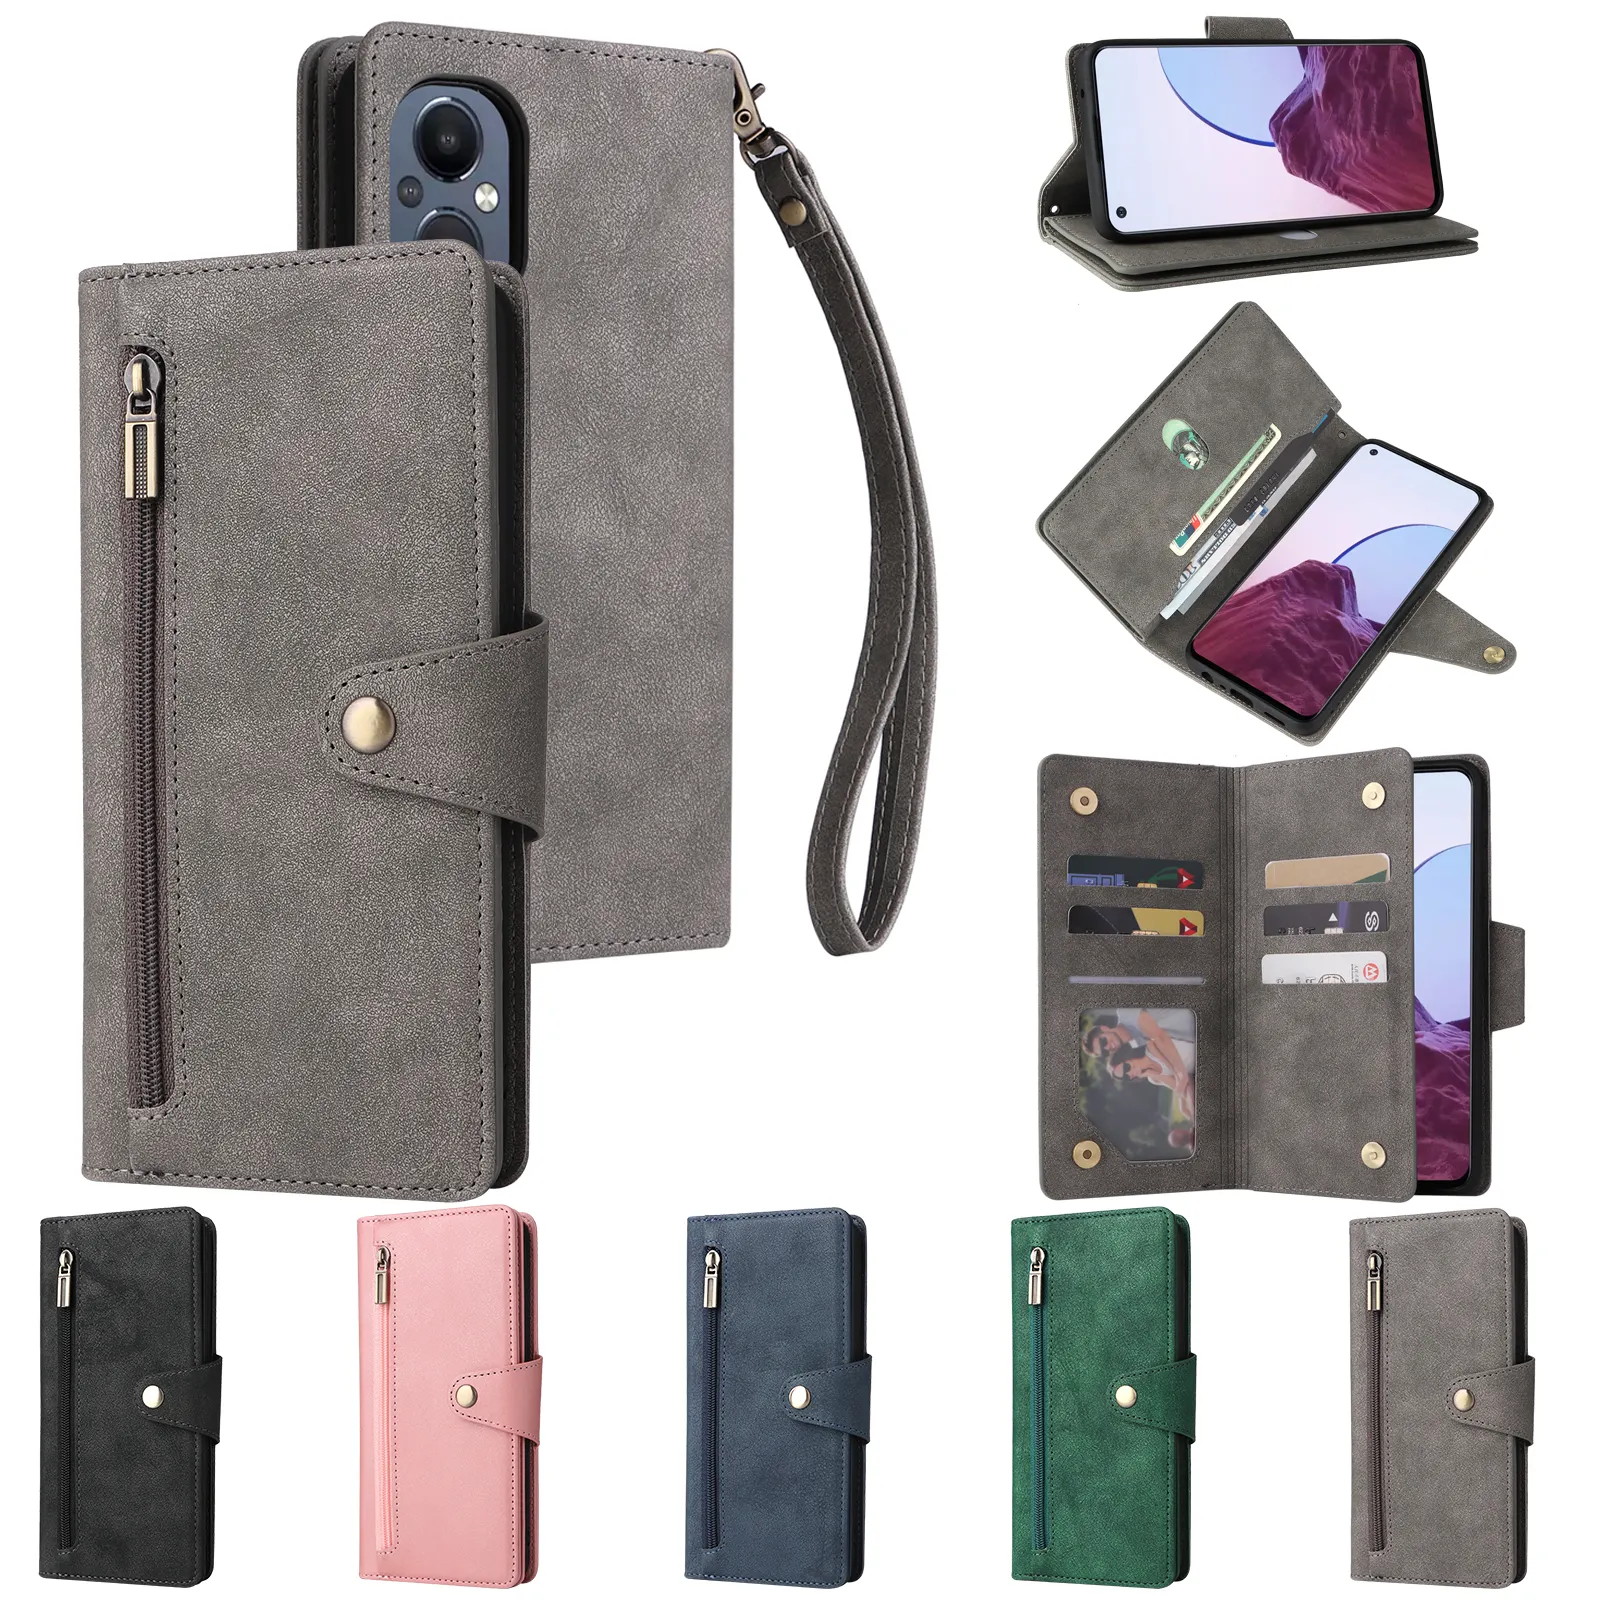 Book Leather Cover Luxury Wallet Phone Case for Realme V11 5G Narzo 50i 50A GT Master C35 C31 C21 C17 C15 C12 C11 Case